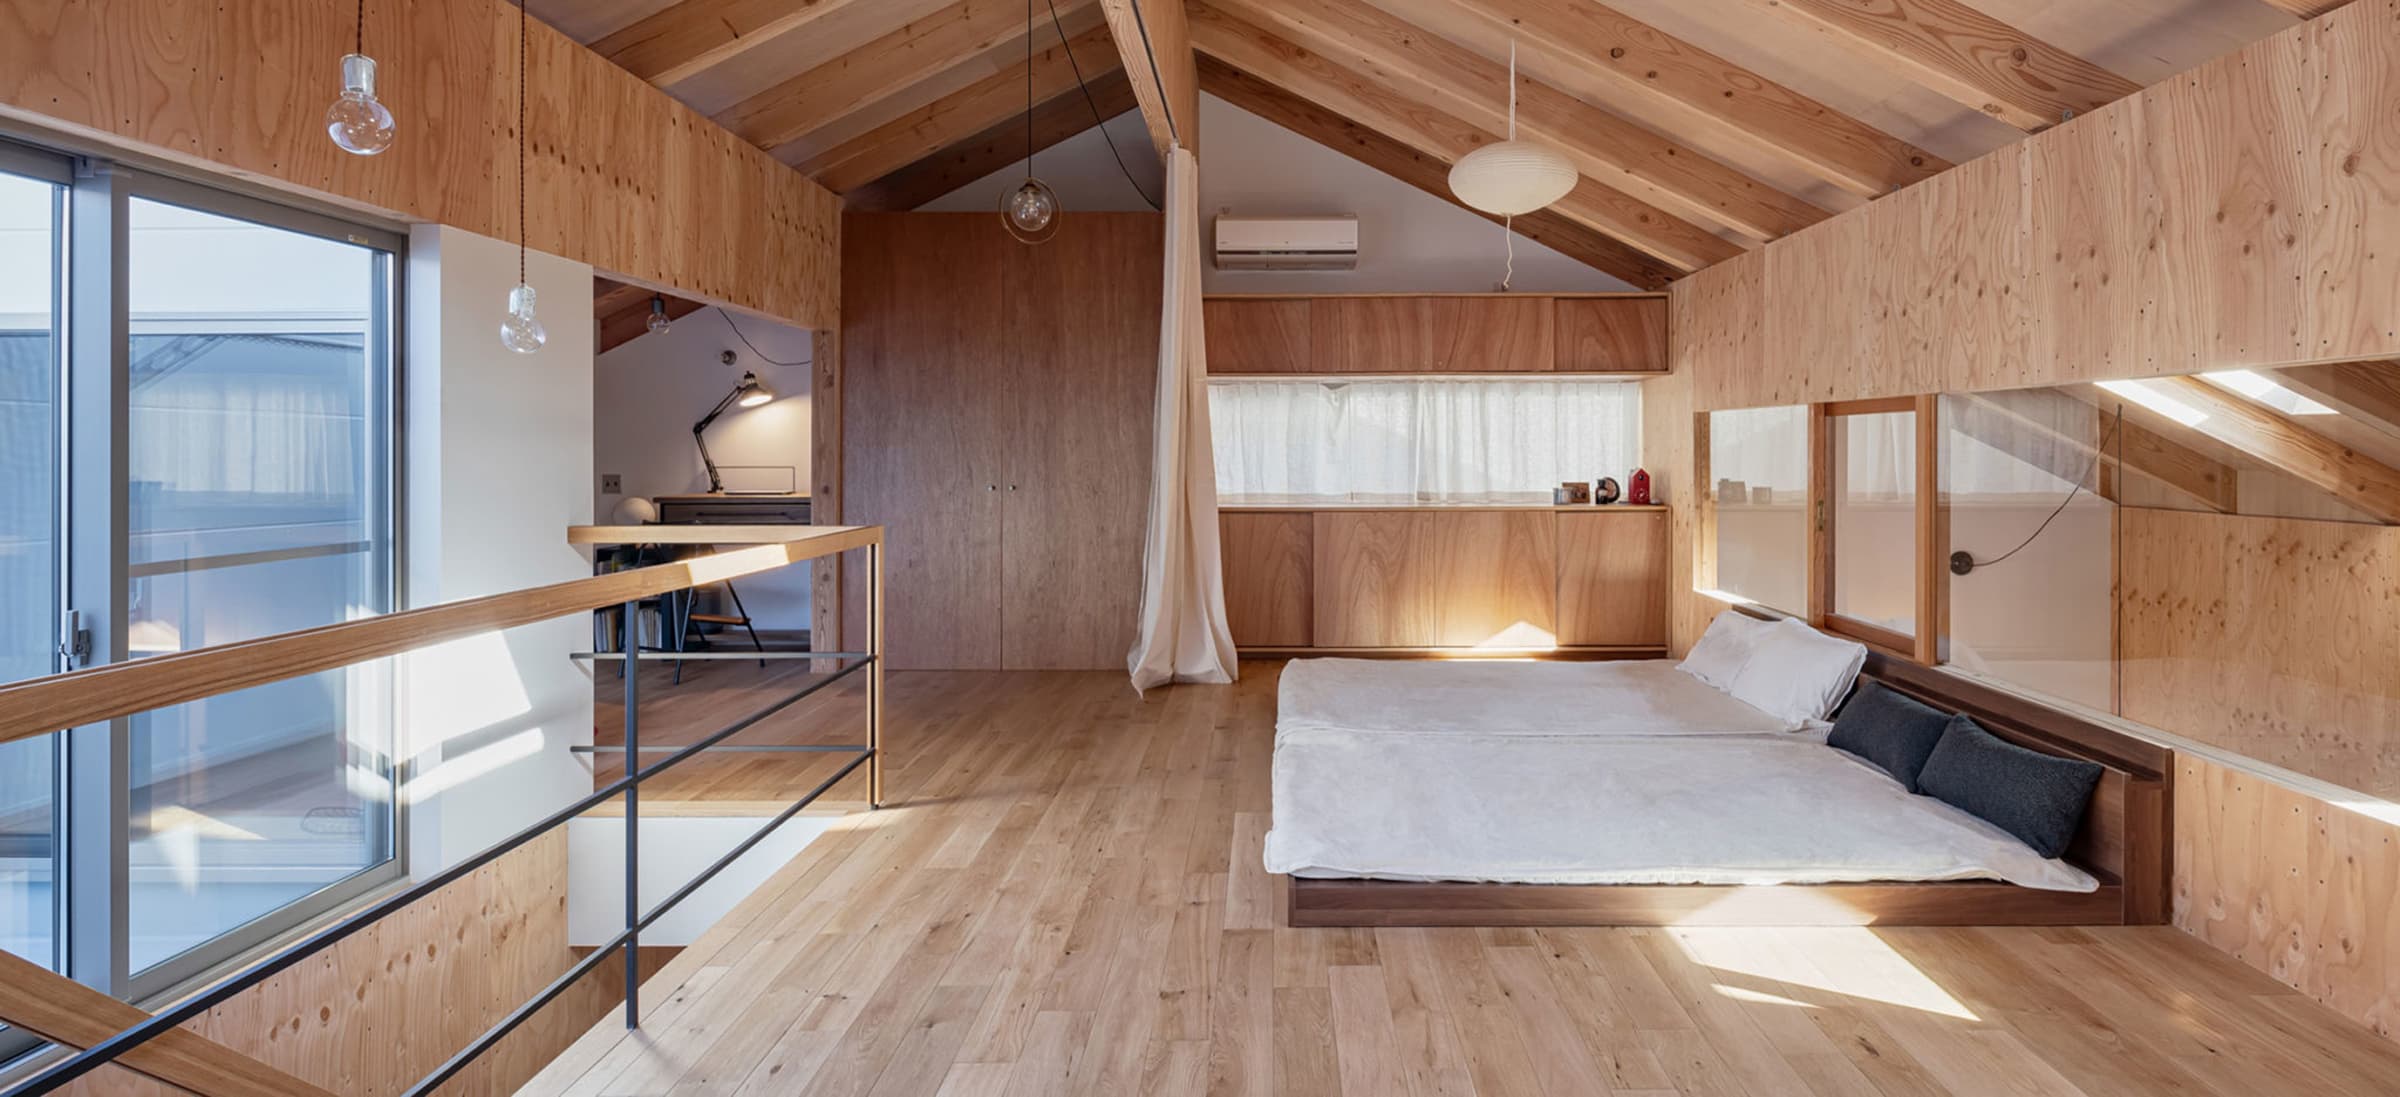 Wood-paneled bedroom in a Japanese house